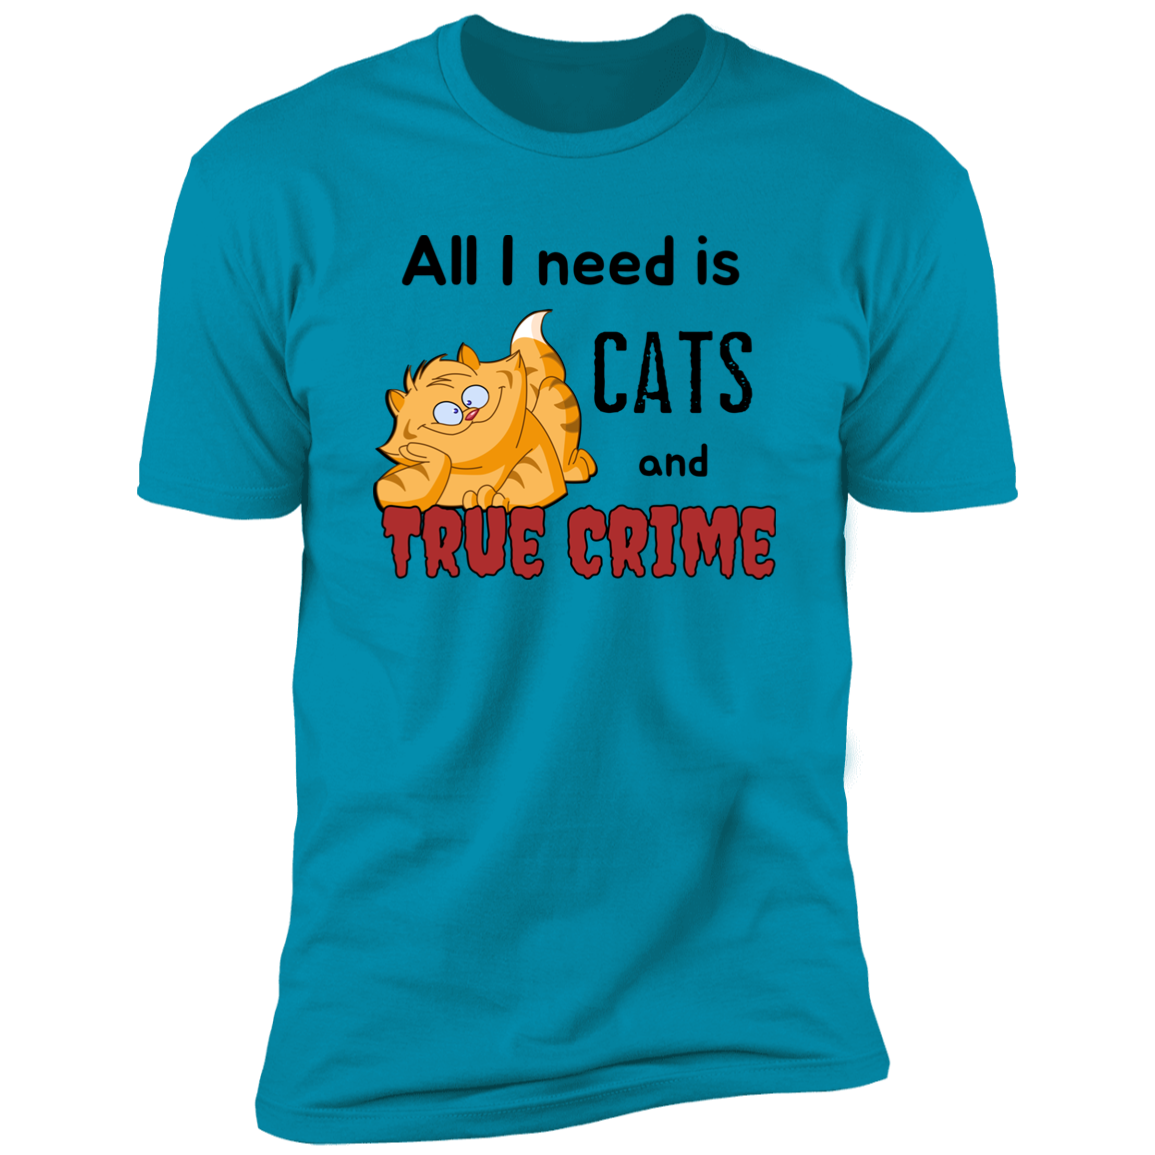 All I Need is Cats and True Crime, Cat shirt for humas, in turquoise 